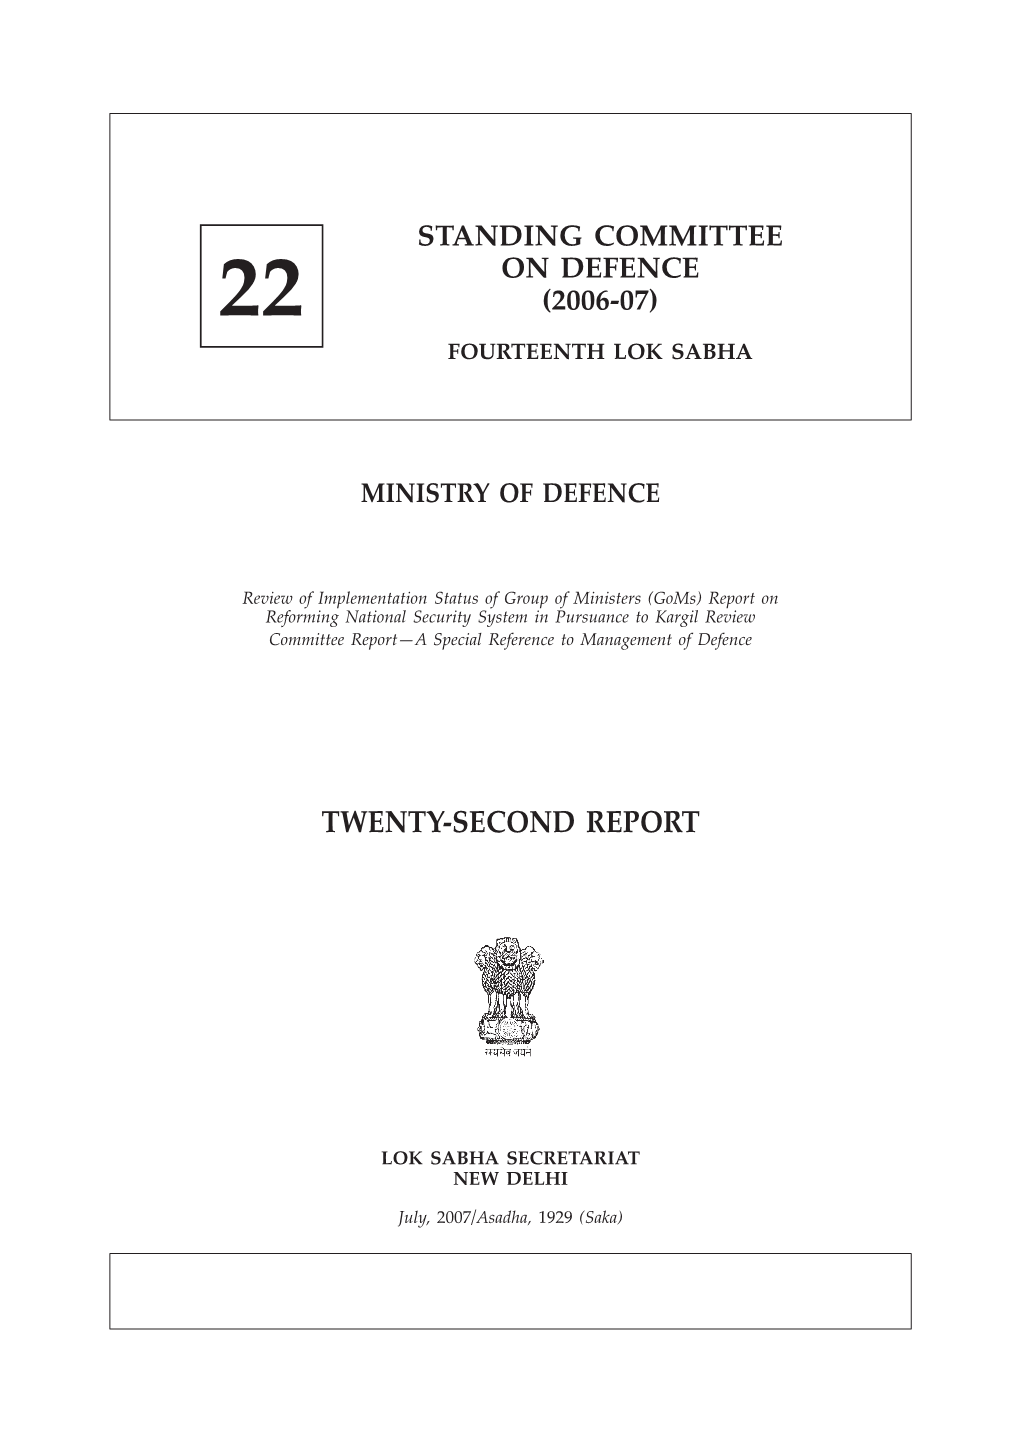 Standing Committee on Defence (2006-07)